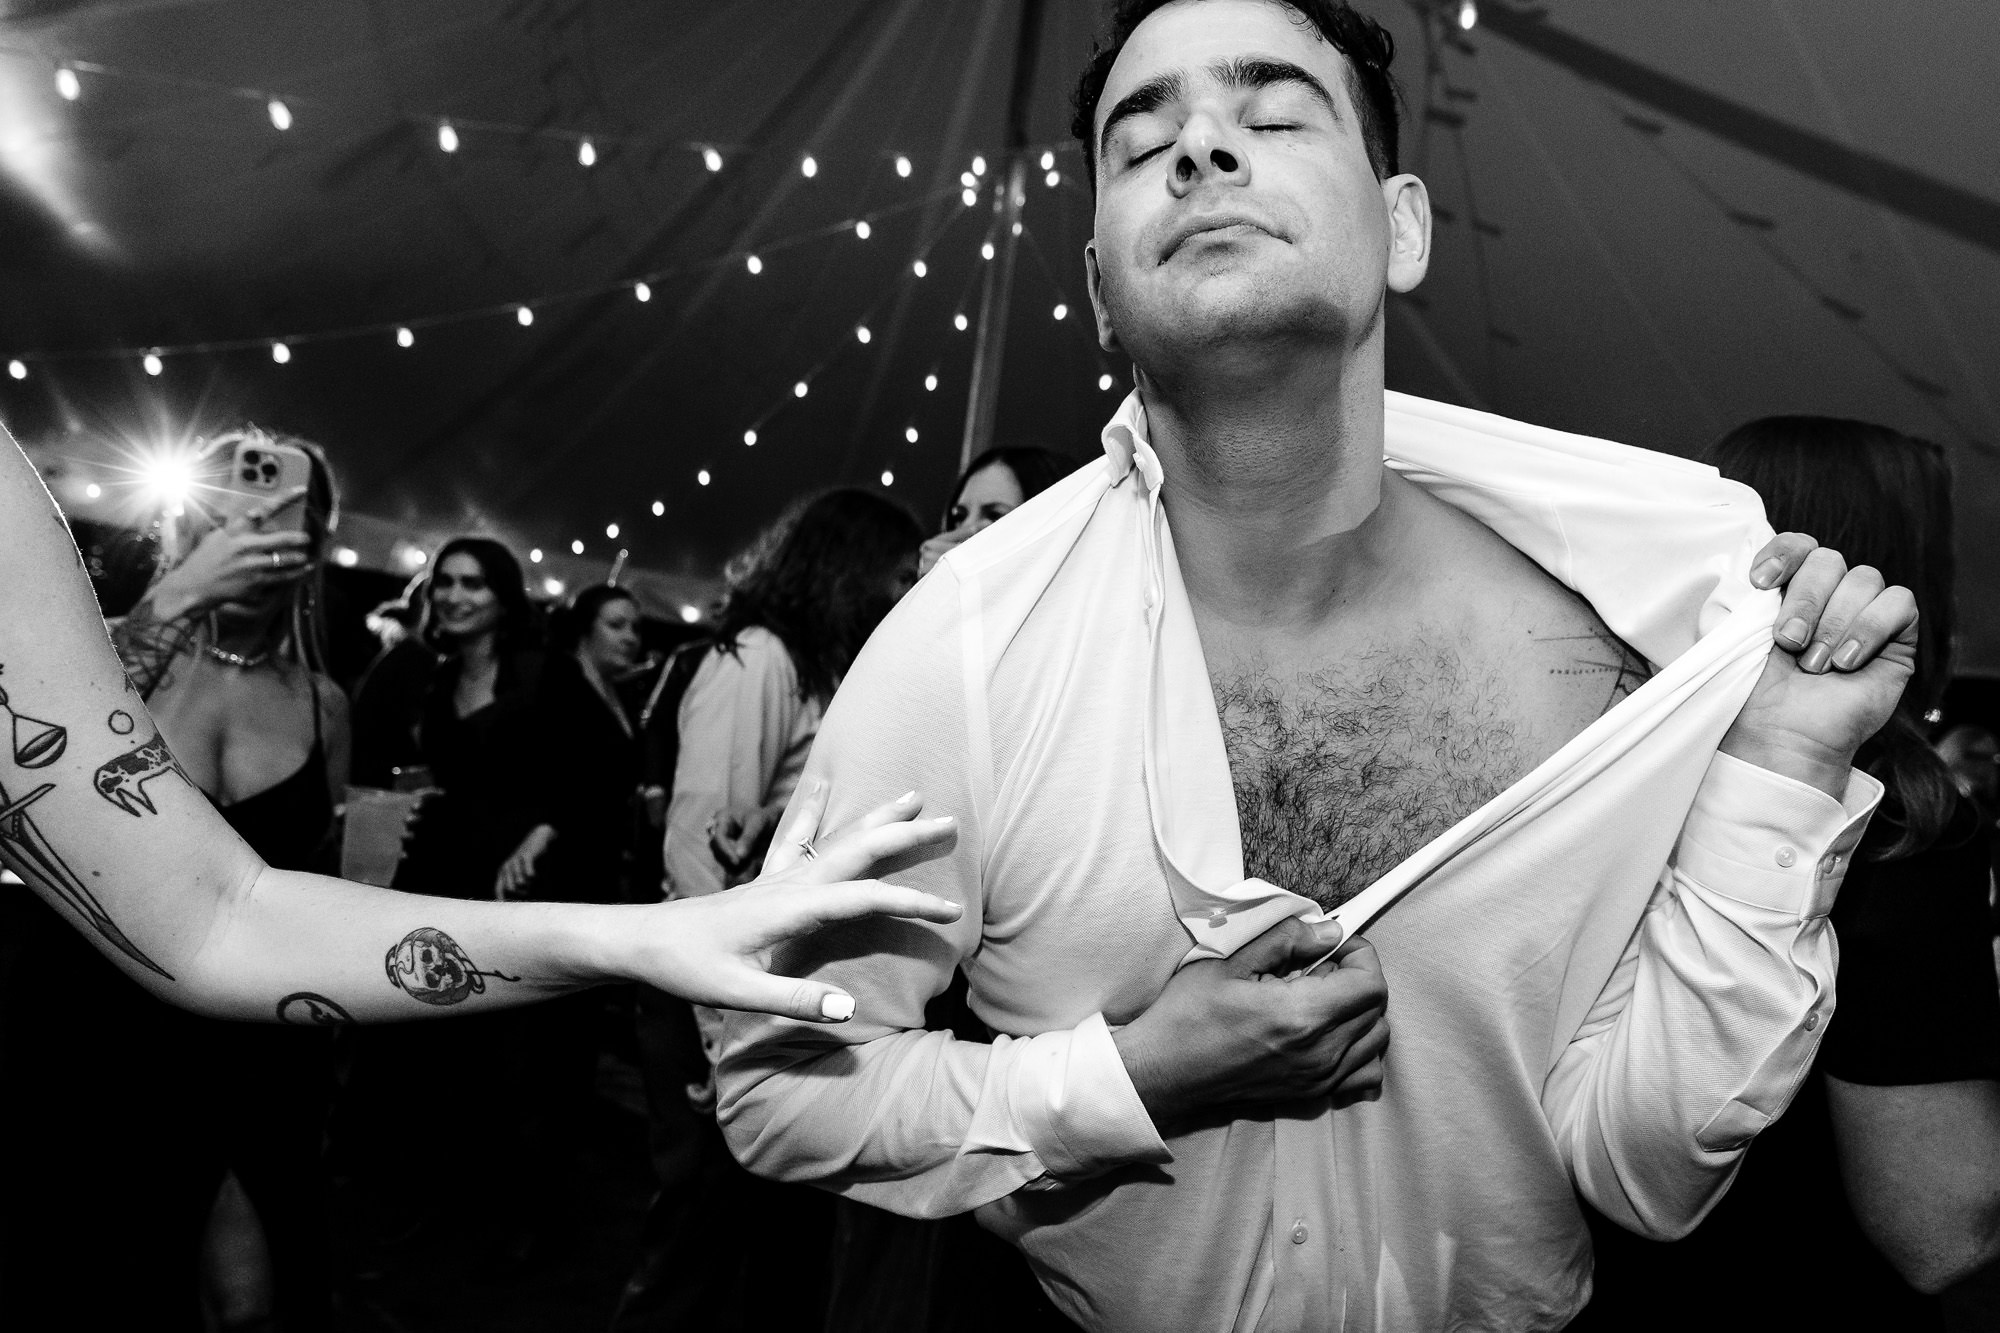 A groom takes off his shirt while dancing at his wedding.